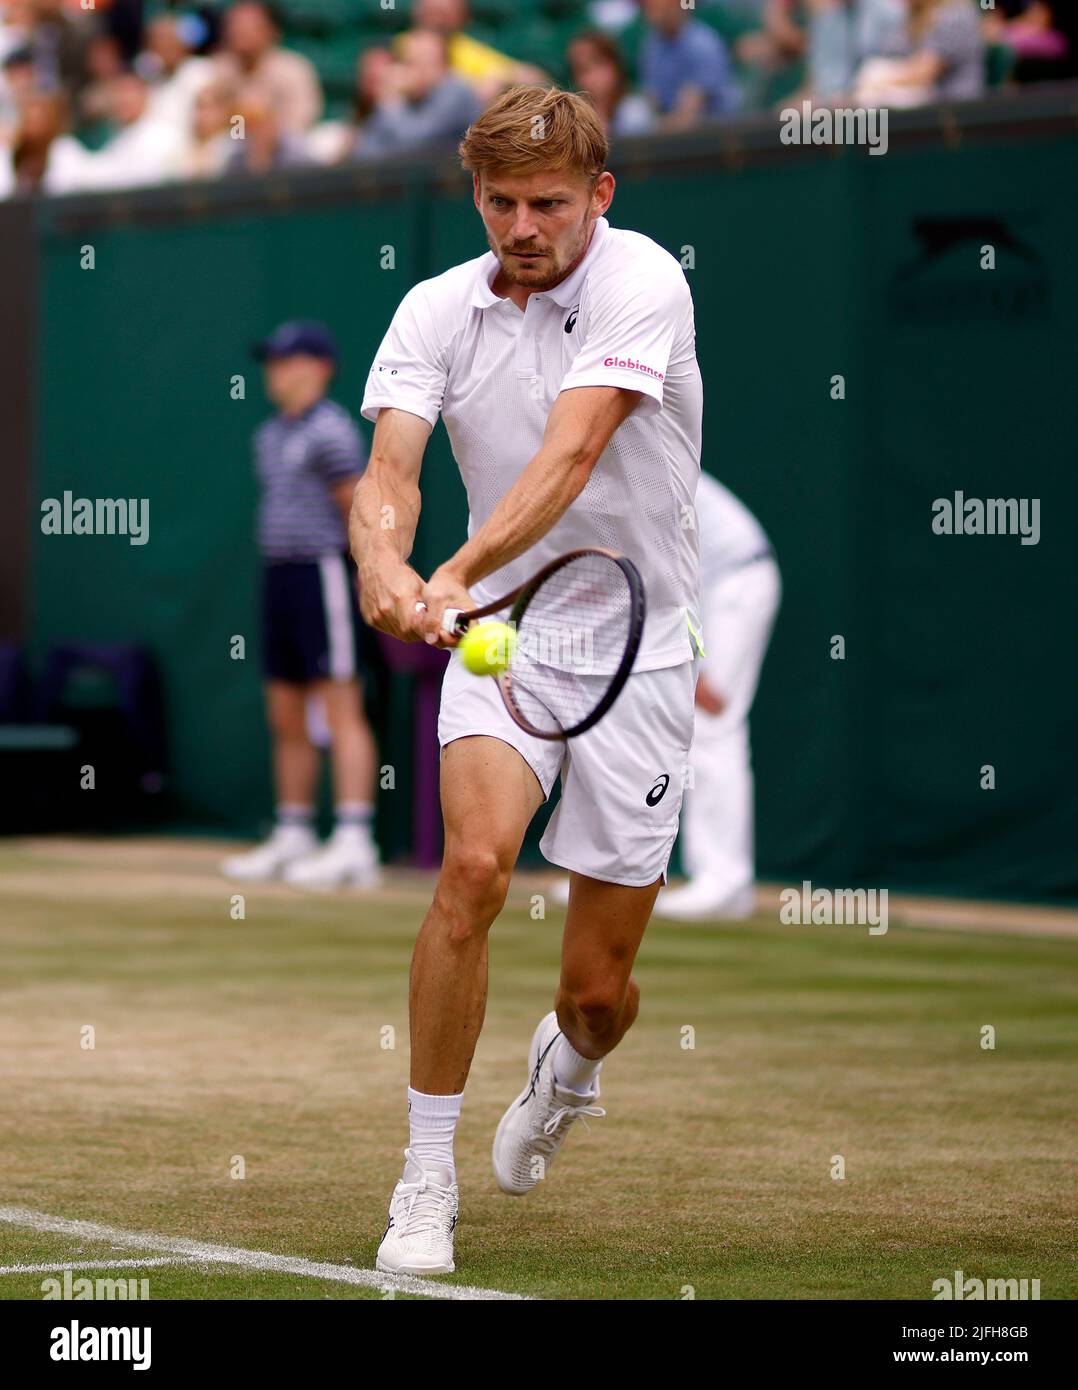 David Goffin in action during his Gentlemens Singles fourth round match against Frances Tiafoe on day seven of the 2022 Wimbledon Championships at the All England Lawn Tennis and Croquet Club, Wimbledon.